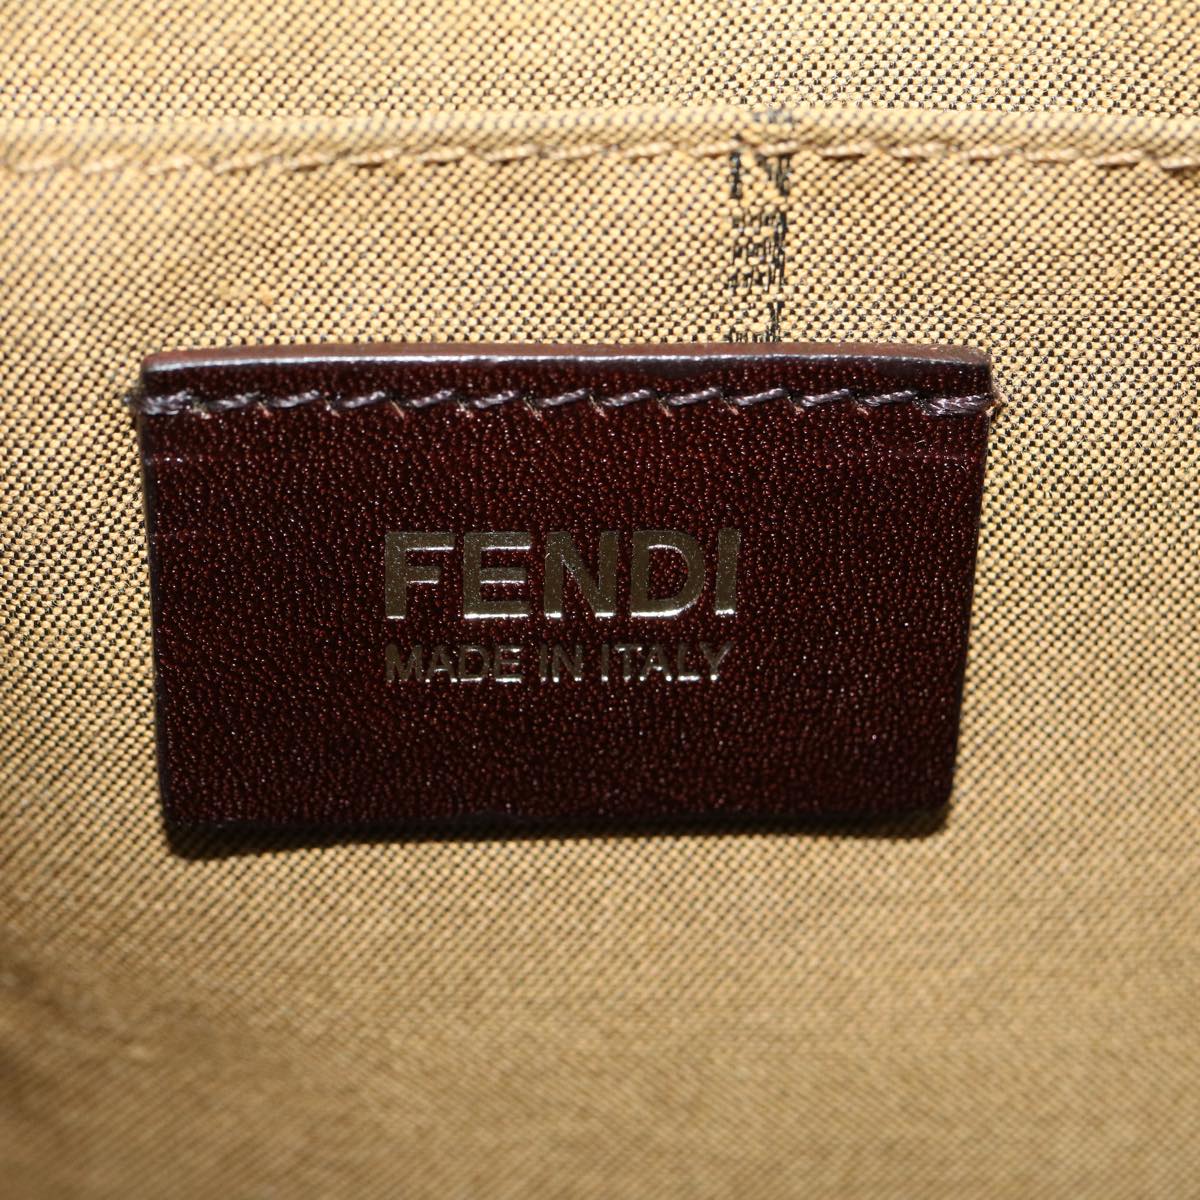 FENDI Tote Bag Leather Gray Auth bs1776